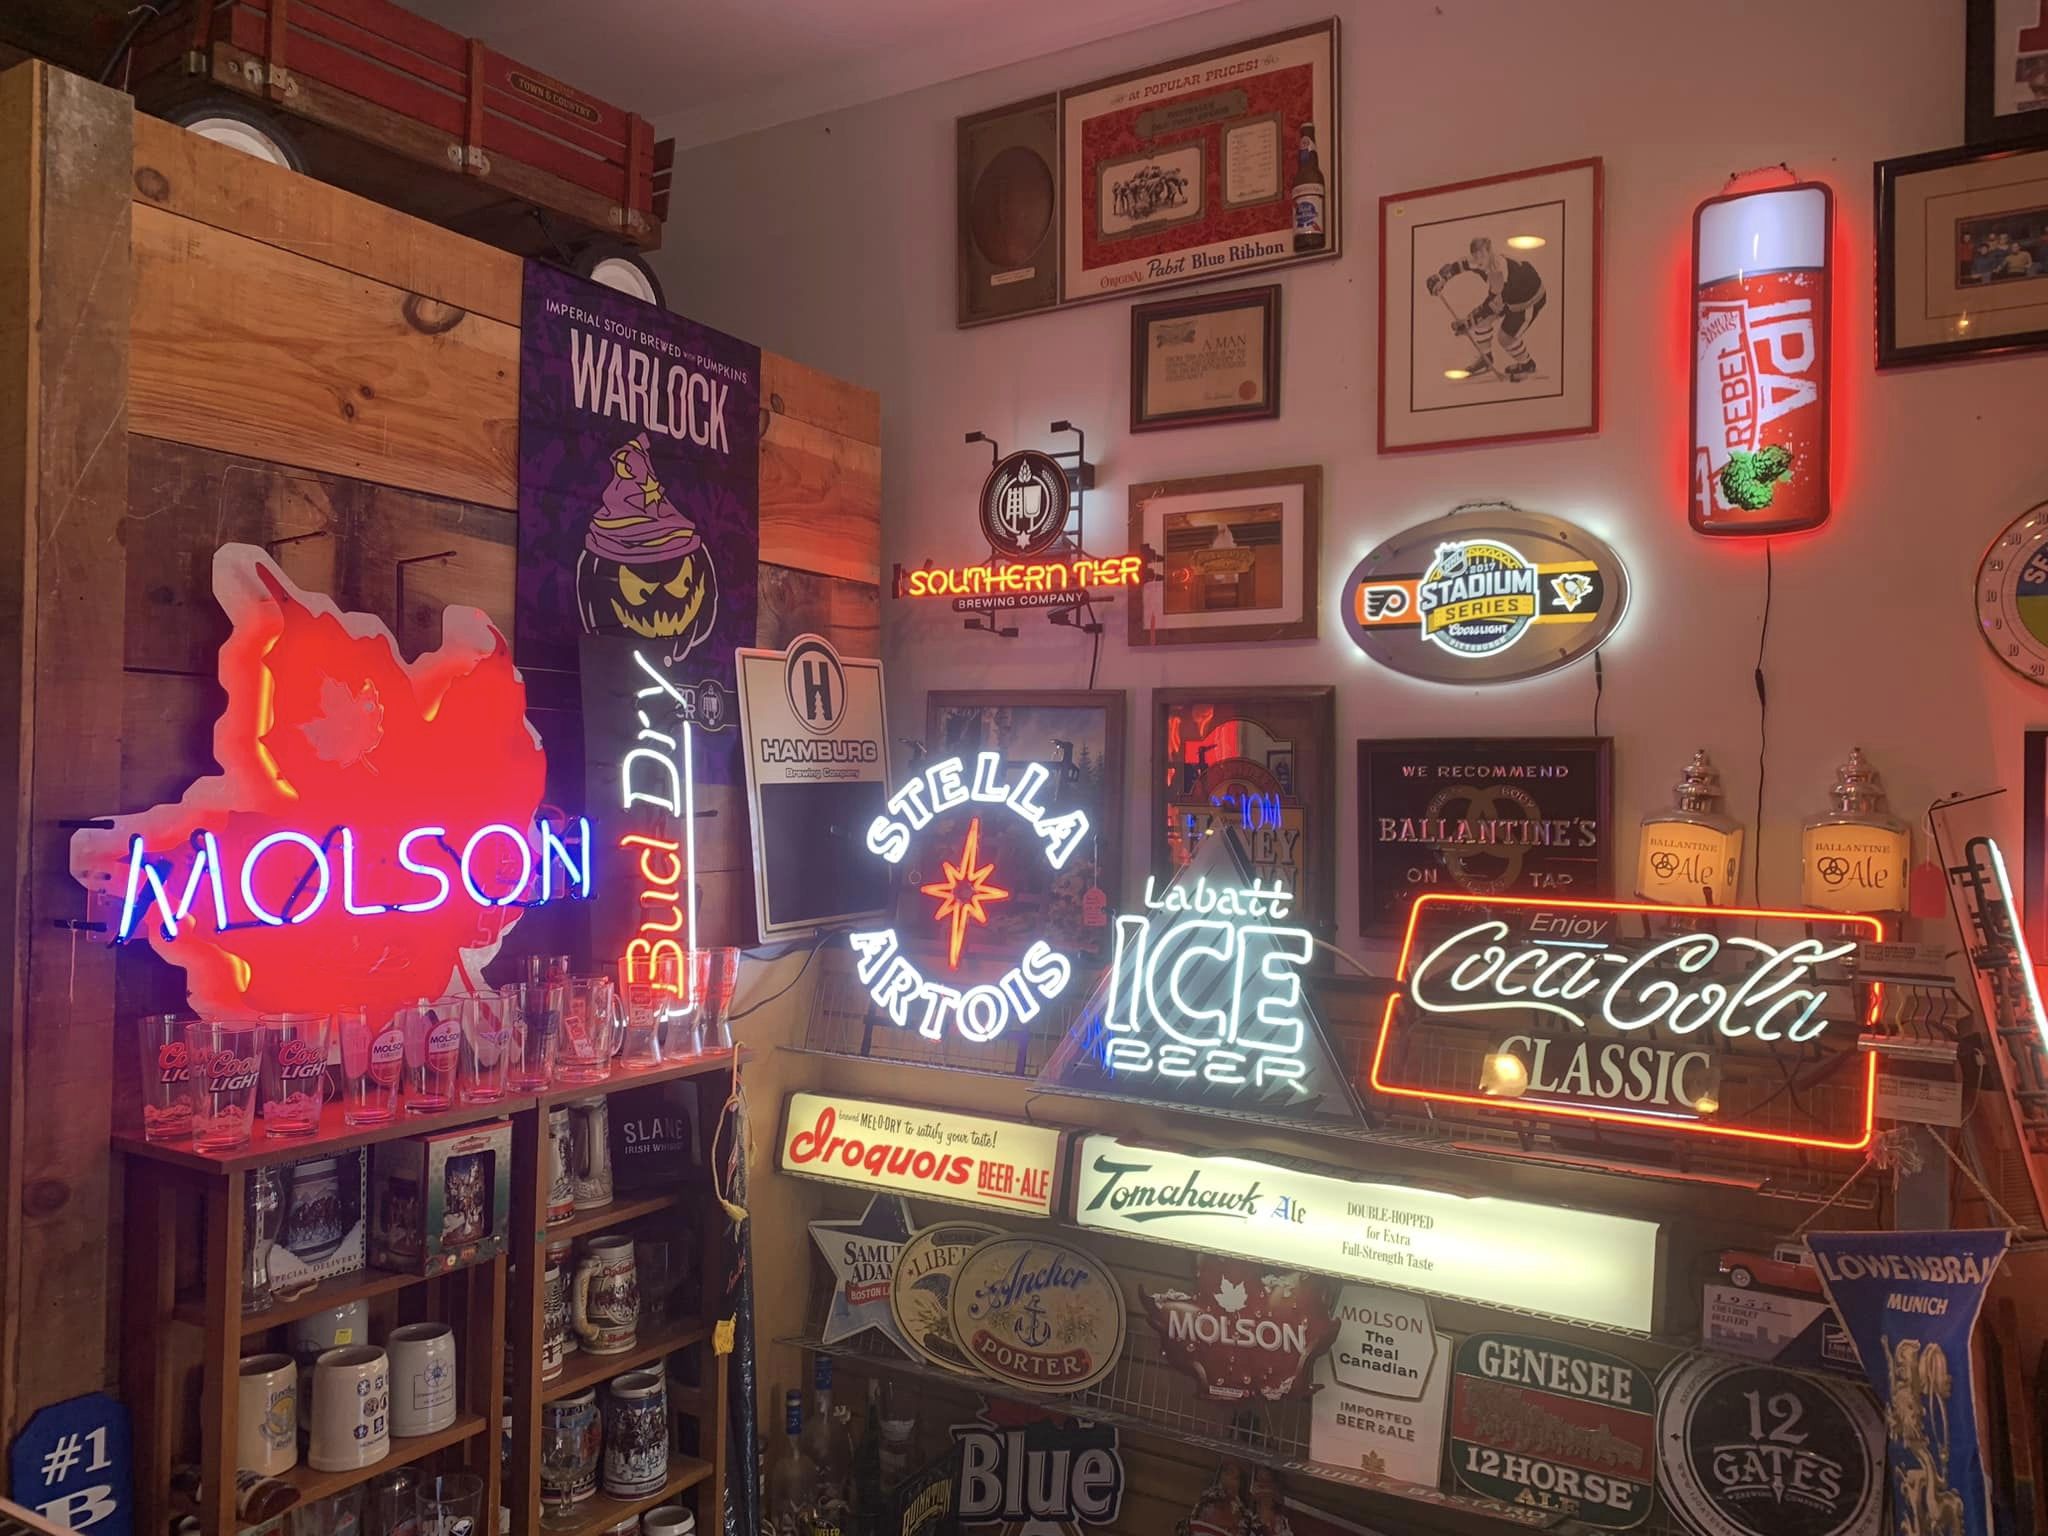 Man Cave Outfitters of Buffalo